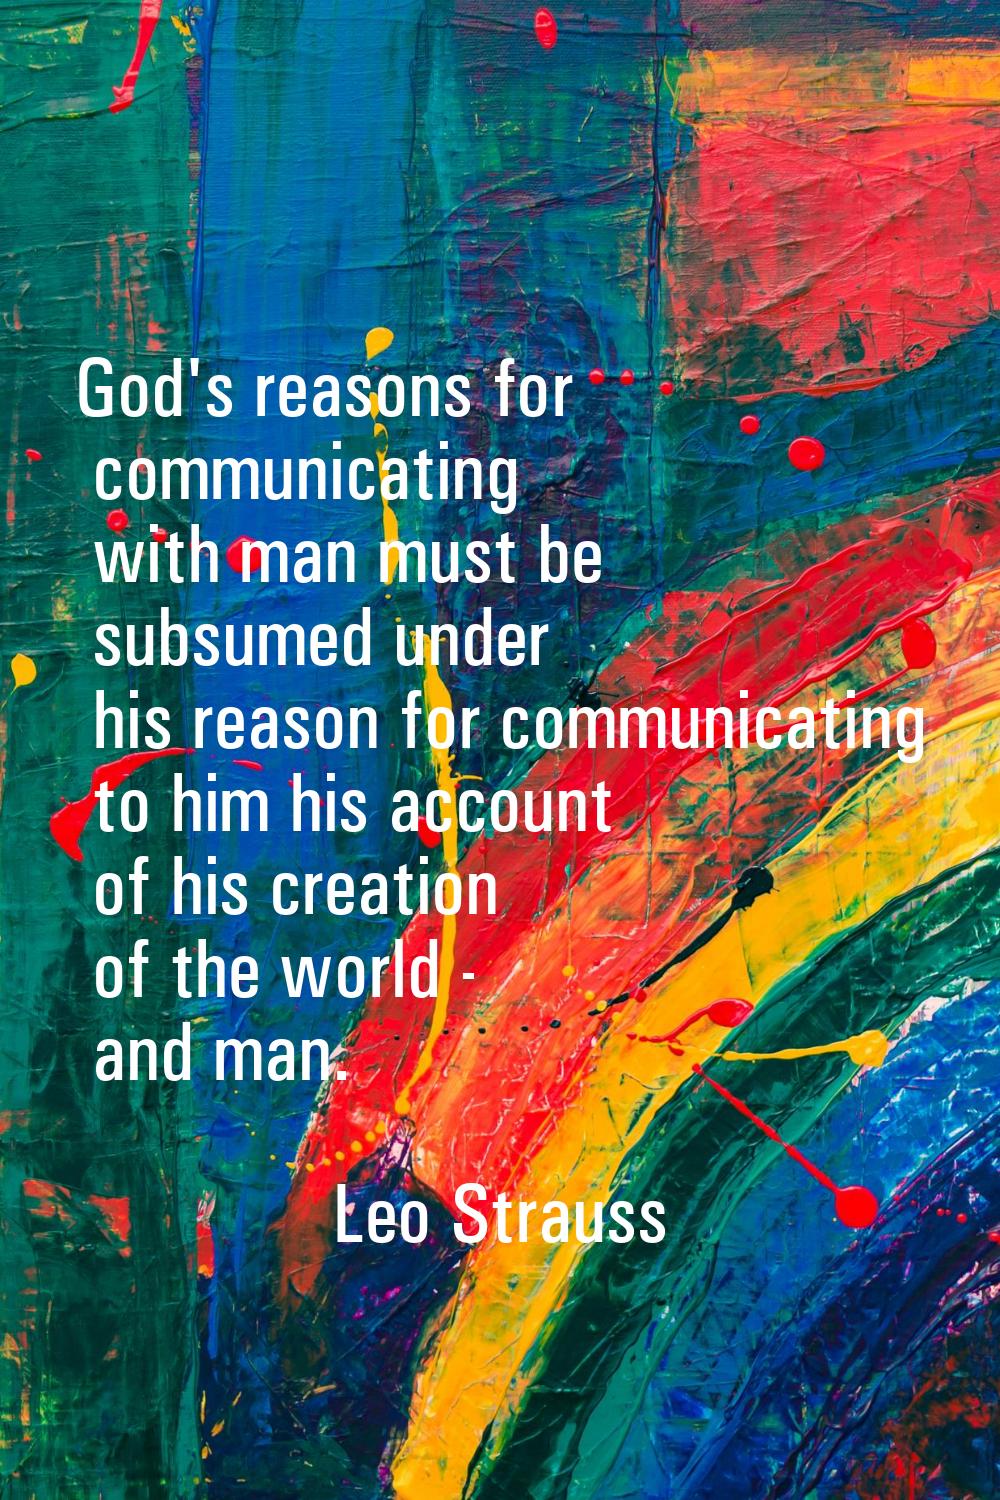 God's reasons for communicating with man must be subsumed under his reason for communicating to him